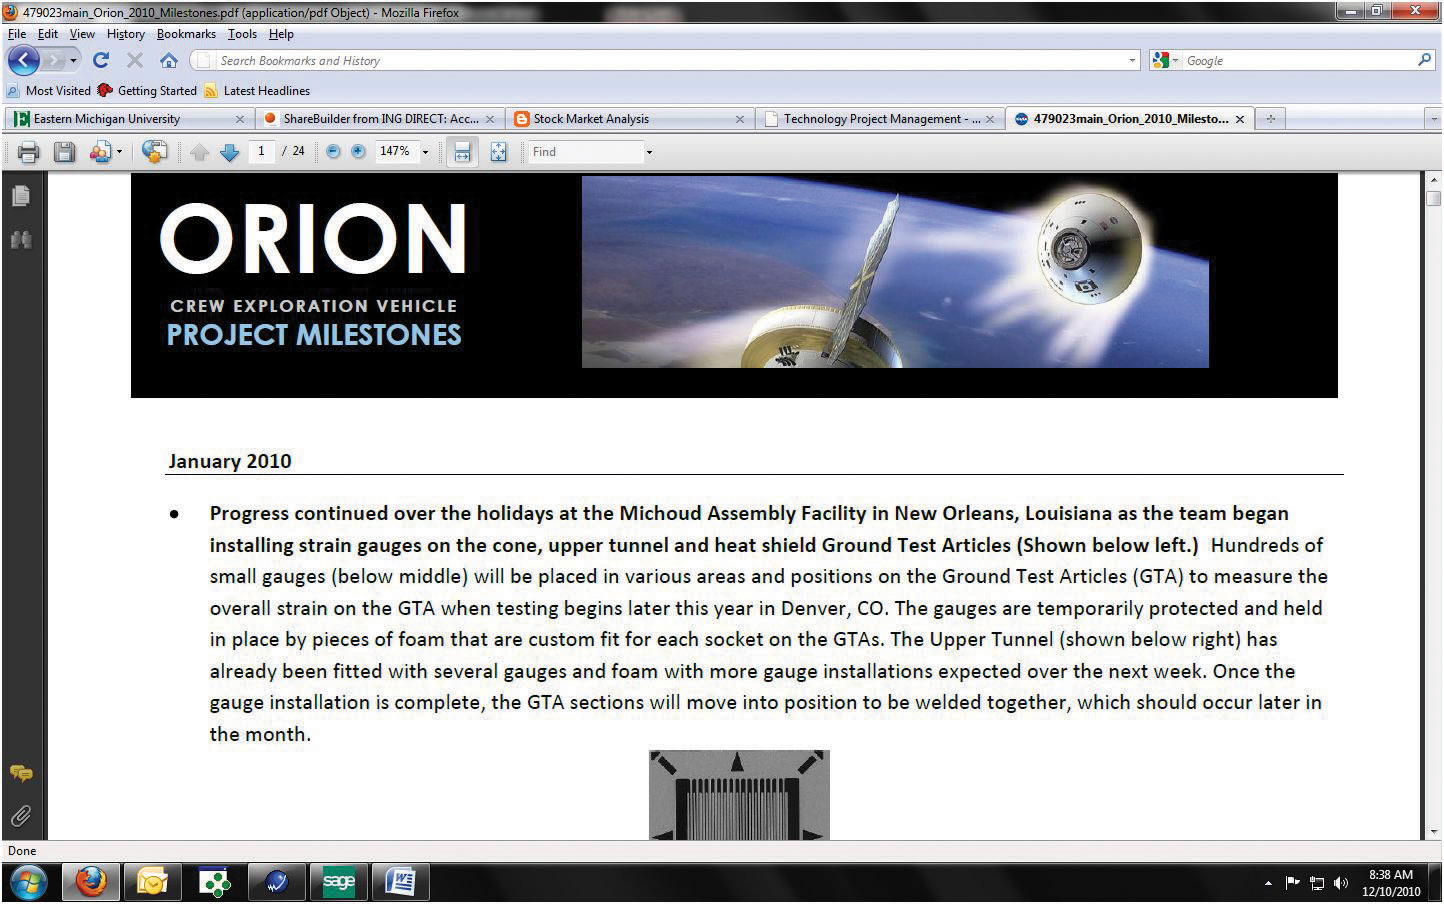 Orion Milestone from NASA's homepage